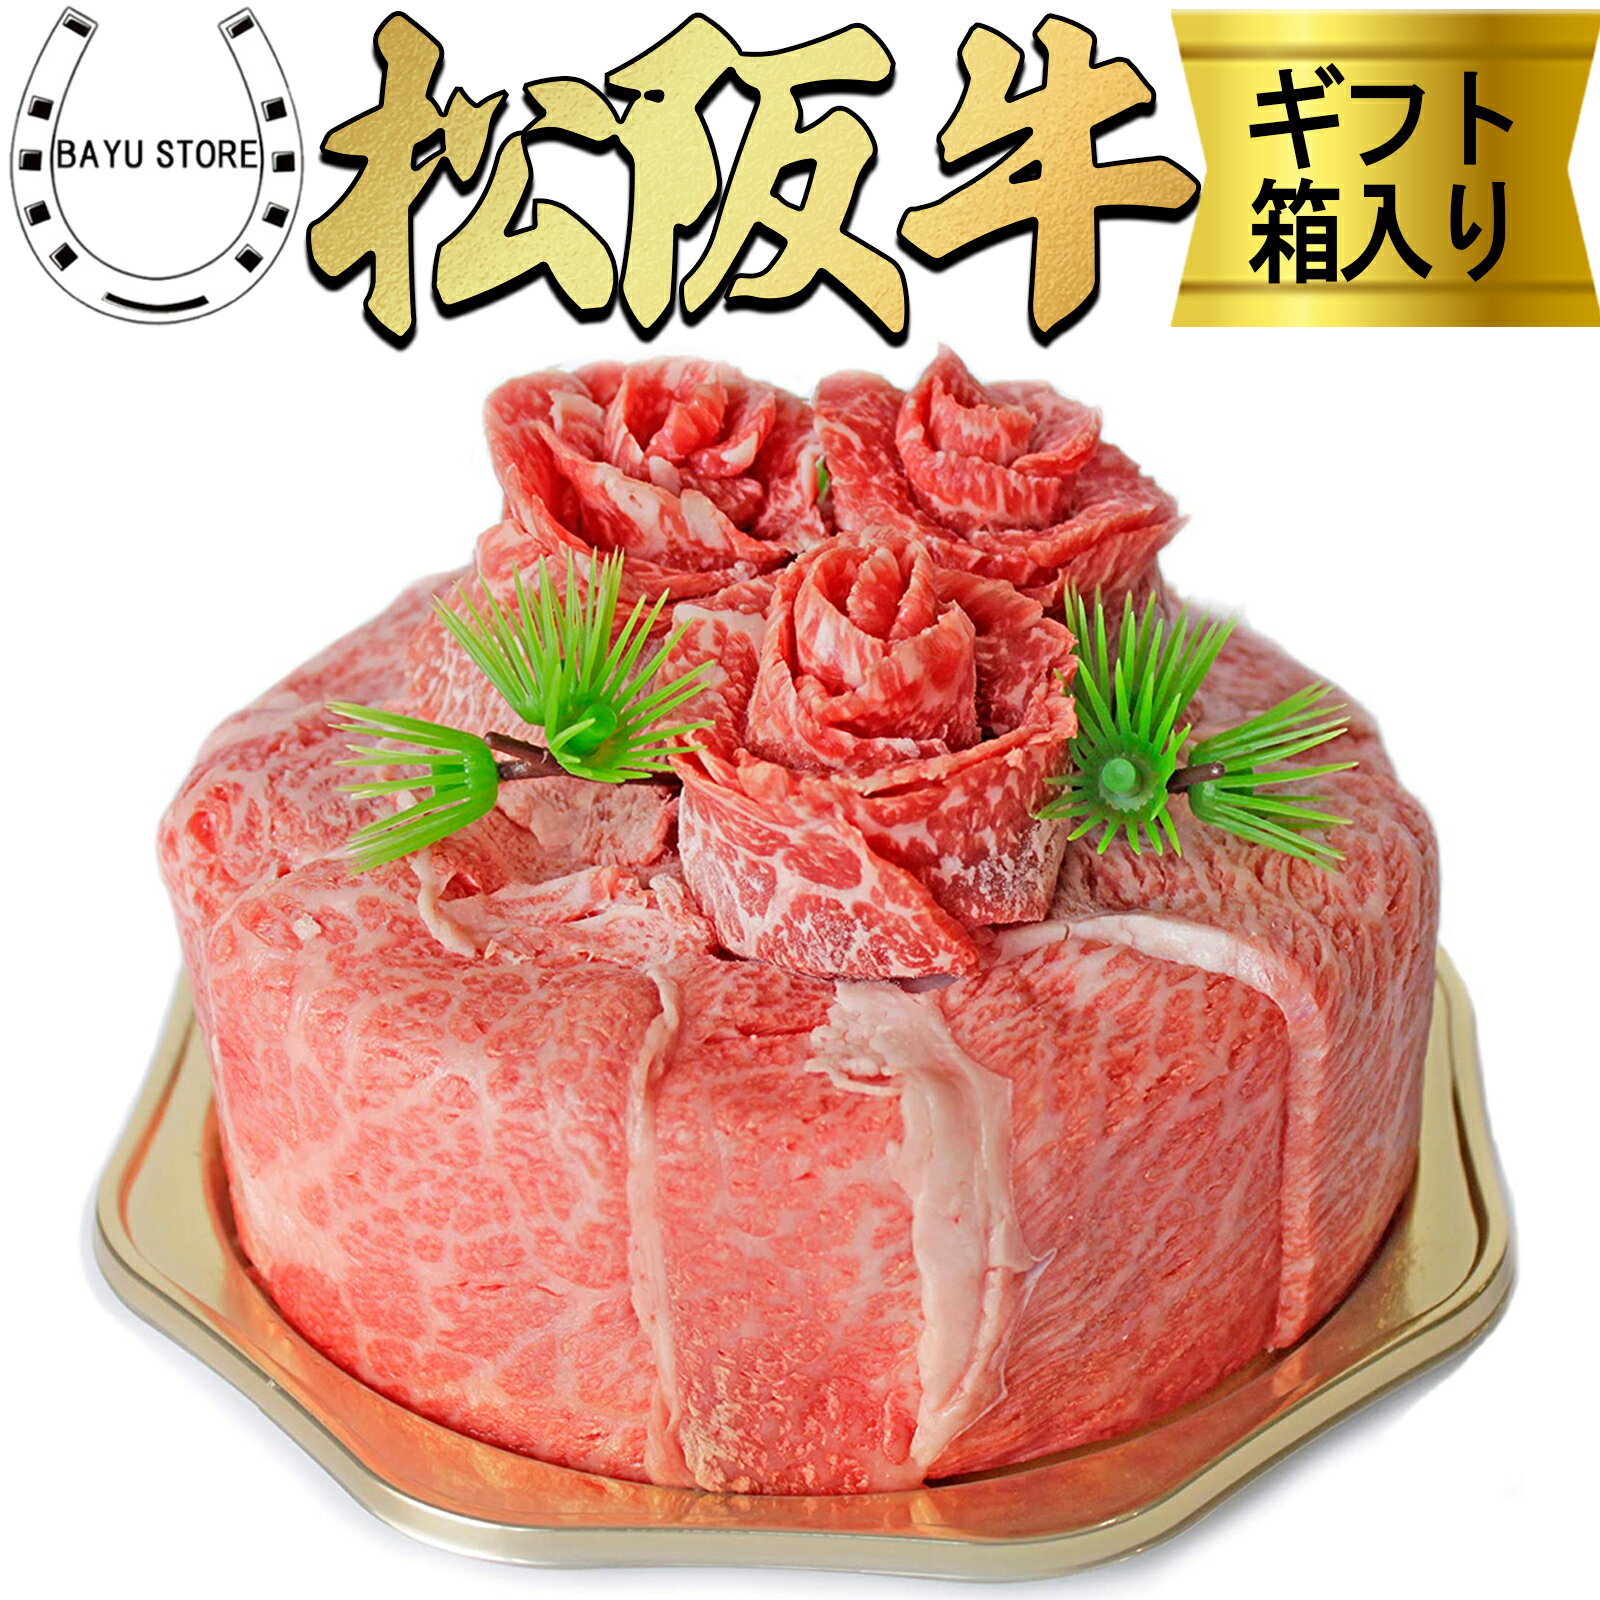 <strong>肉ケーキ</strong> 松阪牛 A5等級 ケーキ盛り 300g(2～3人前) 母の日 贈り物 食べ比べ <strong>焼肉</strong> セット すき焼き しゃぶしゃぶ用 <strong>肉ケーキ</strong> 誕生日ケーキ 誕生日プレゼント お歳暮 ギフト 誕生日 高級 内祝い ギフト 松阪牛 焼き肉 松坂牛 送料無料 ※北海道・沖縄・離島を除く